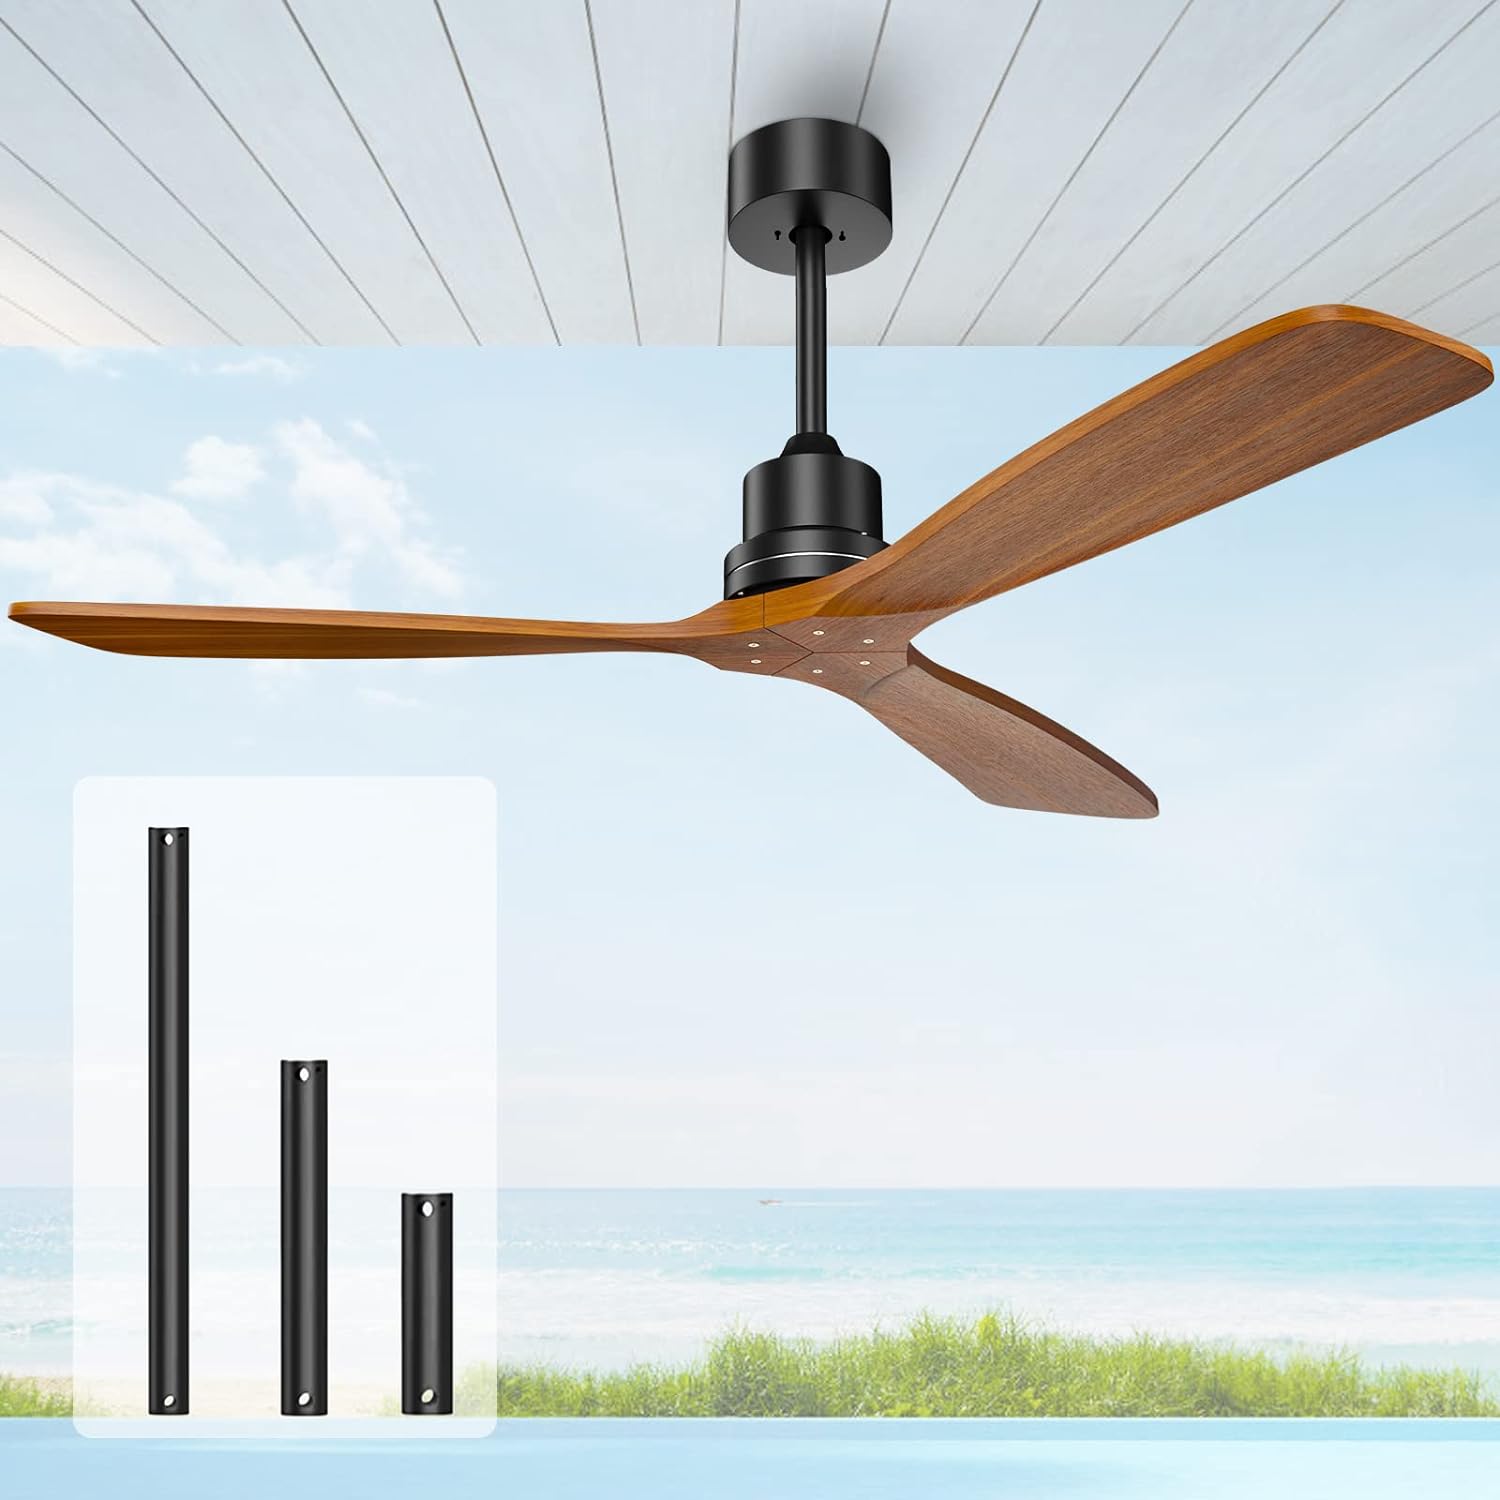 Obabala Modern Ceiling Fan No Light with Remote, Outdoor Ceiling Fan Without Light 3 blade Wood Walnut Fan for Patios/Farmhouse Reversible DC Motor, 52'', Brown